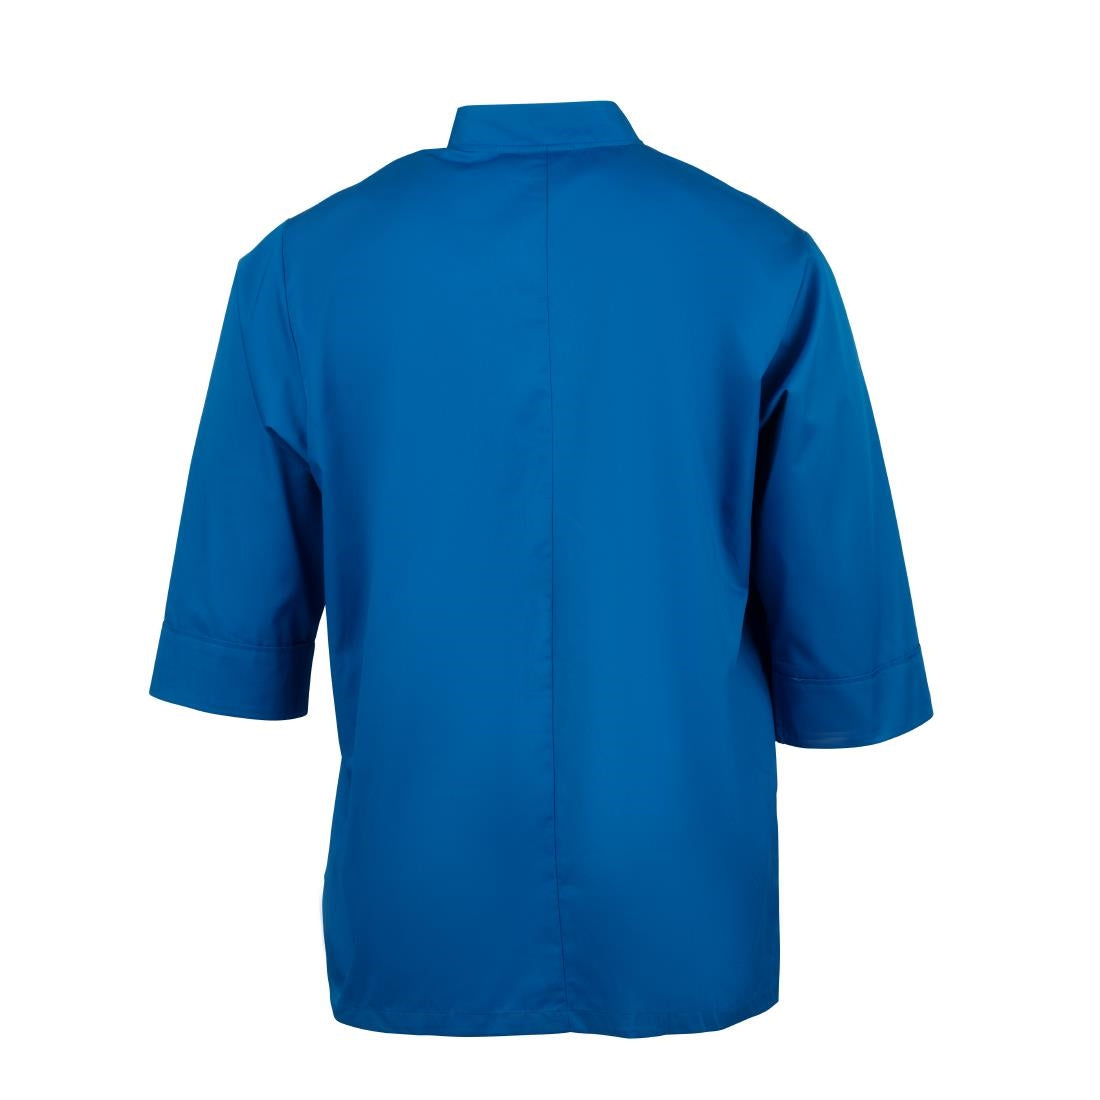 B178-M Chef Works Unisex Chefs Jacket Blue M JD Catering Equipment Solutions Ltd